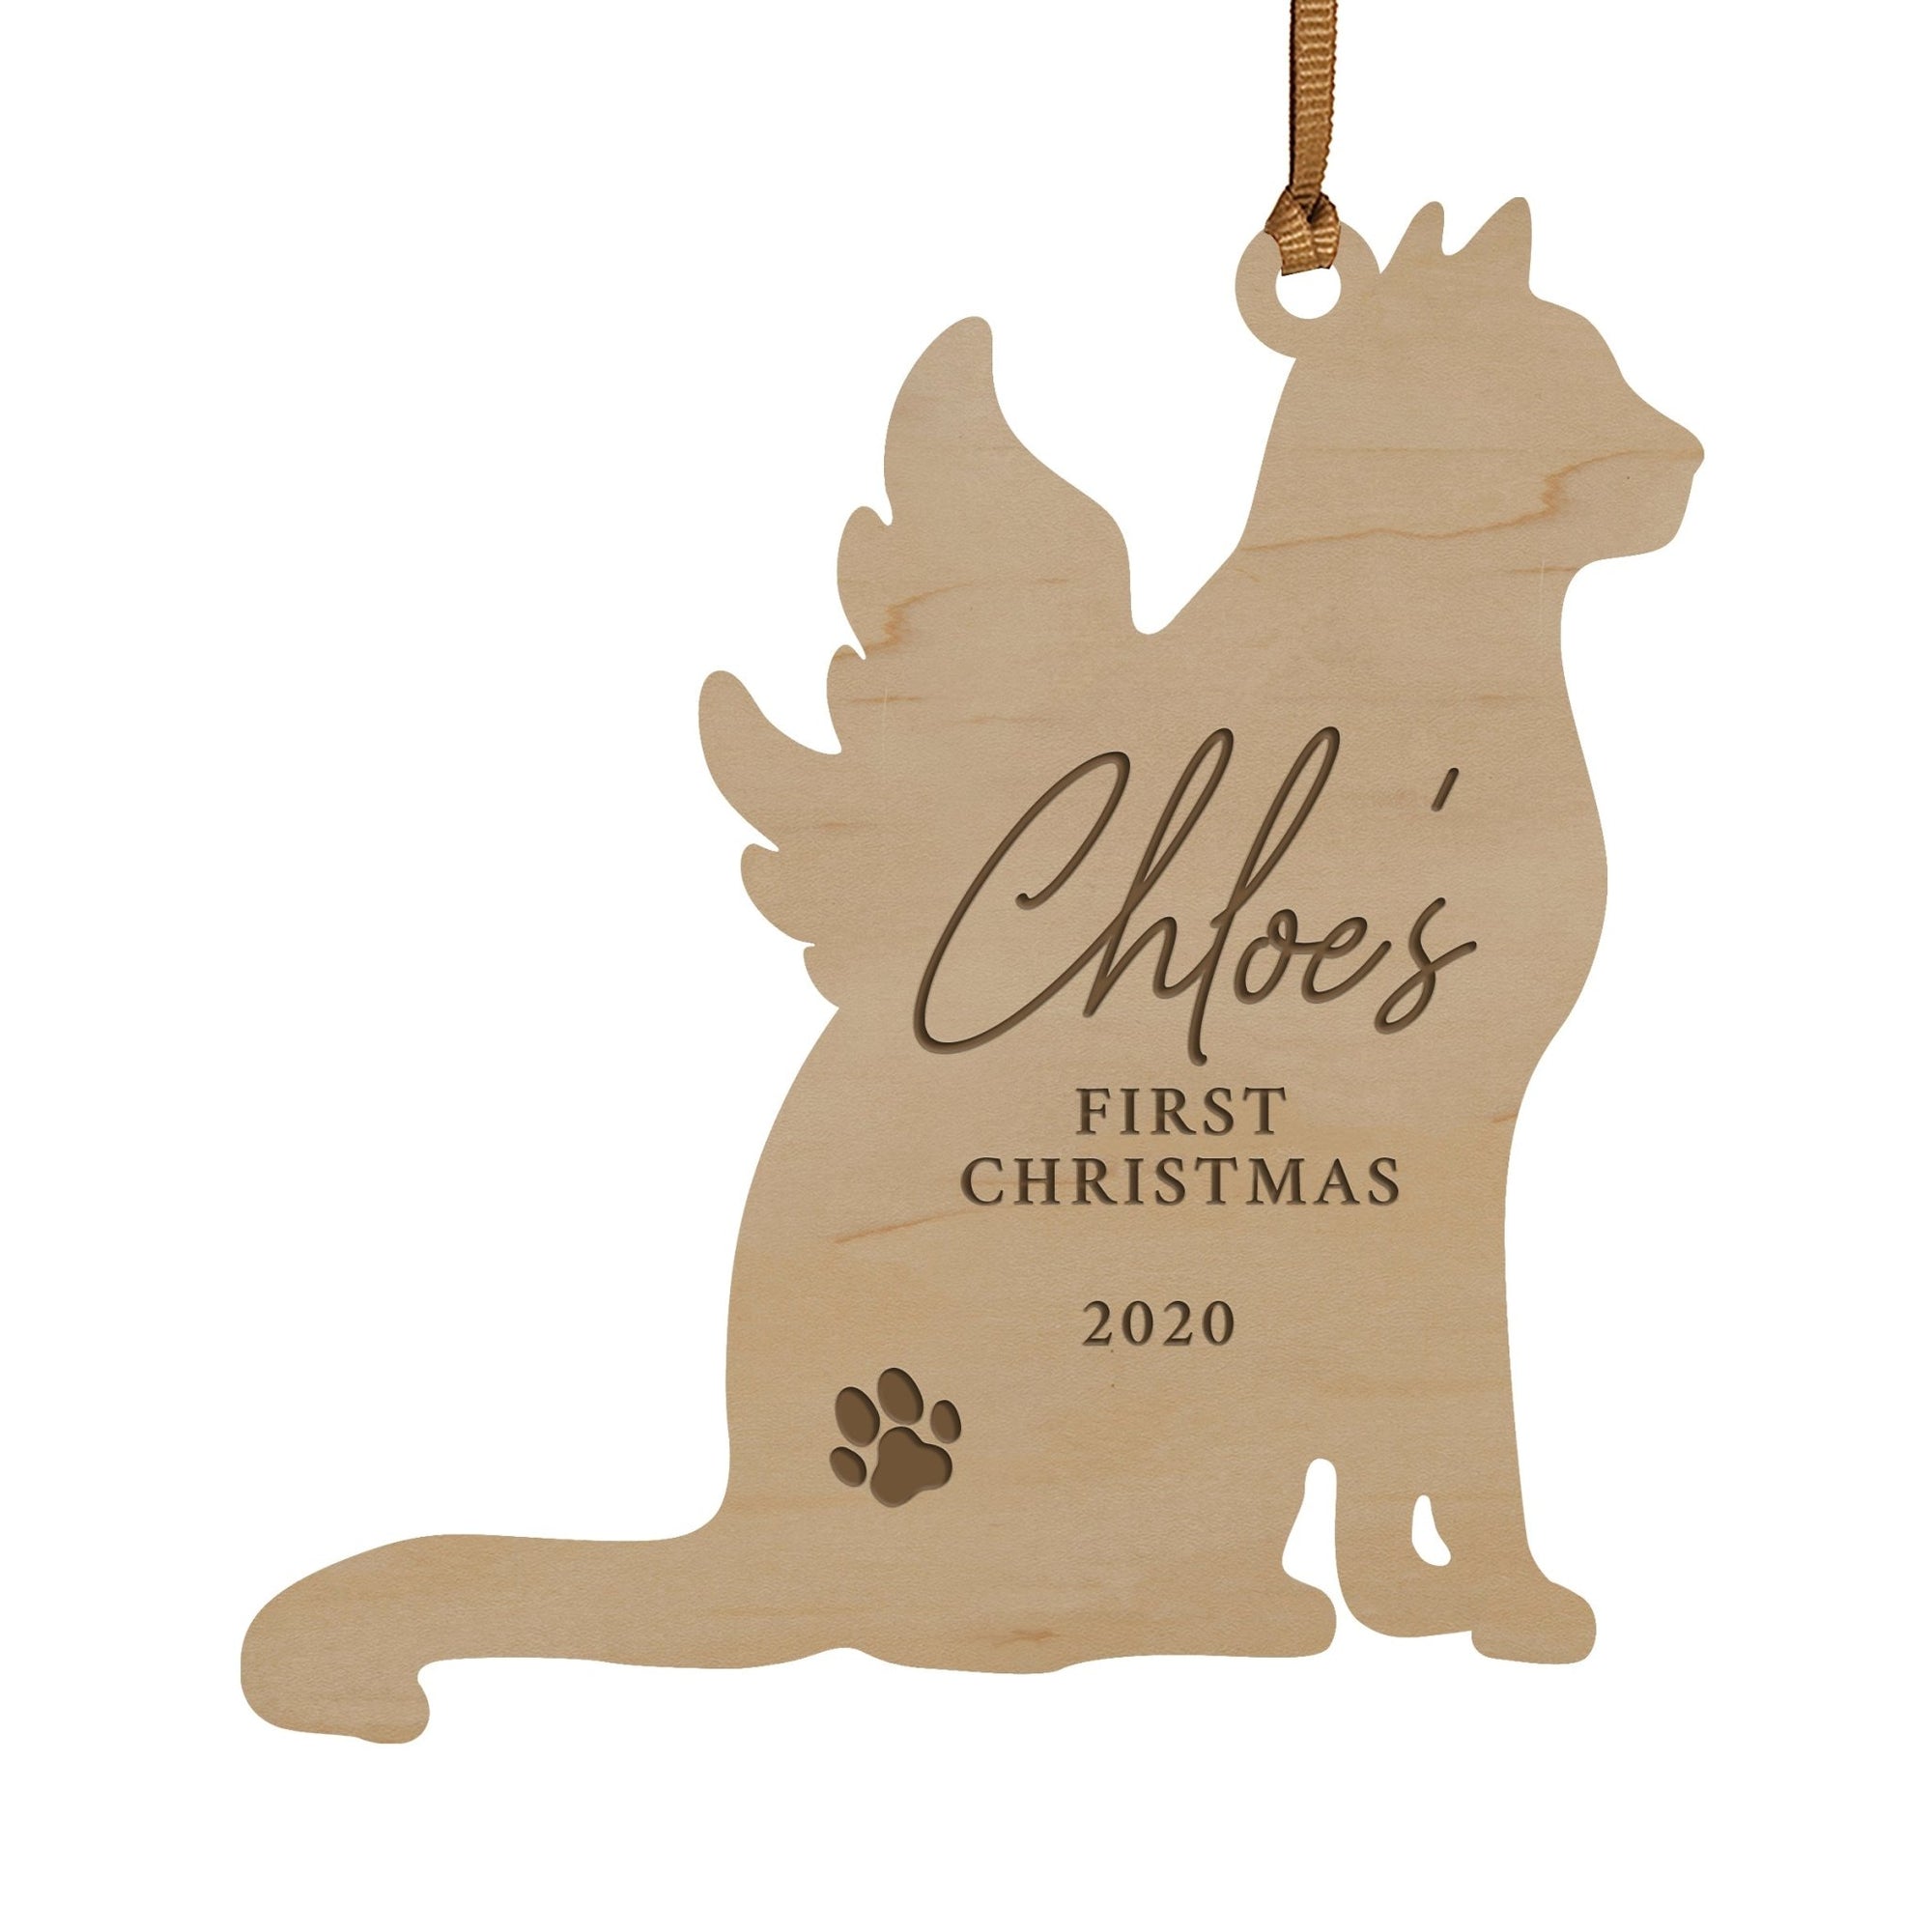 Personalized Engraved Christmas Cat Ornament 4.9375” x 5.375” x 0.125” - Christmas (PAW) - LifeSong Milestones